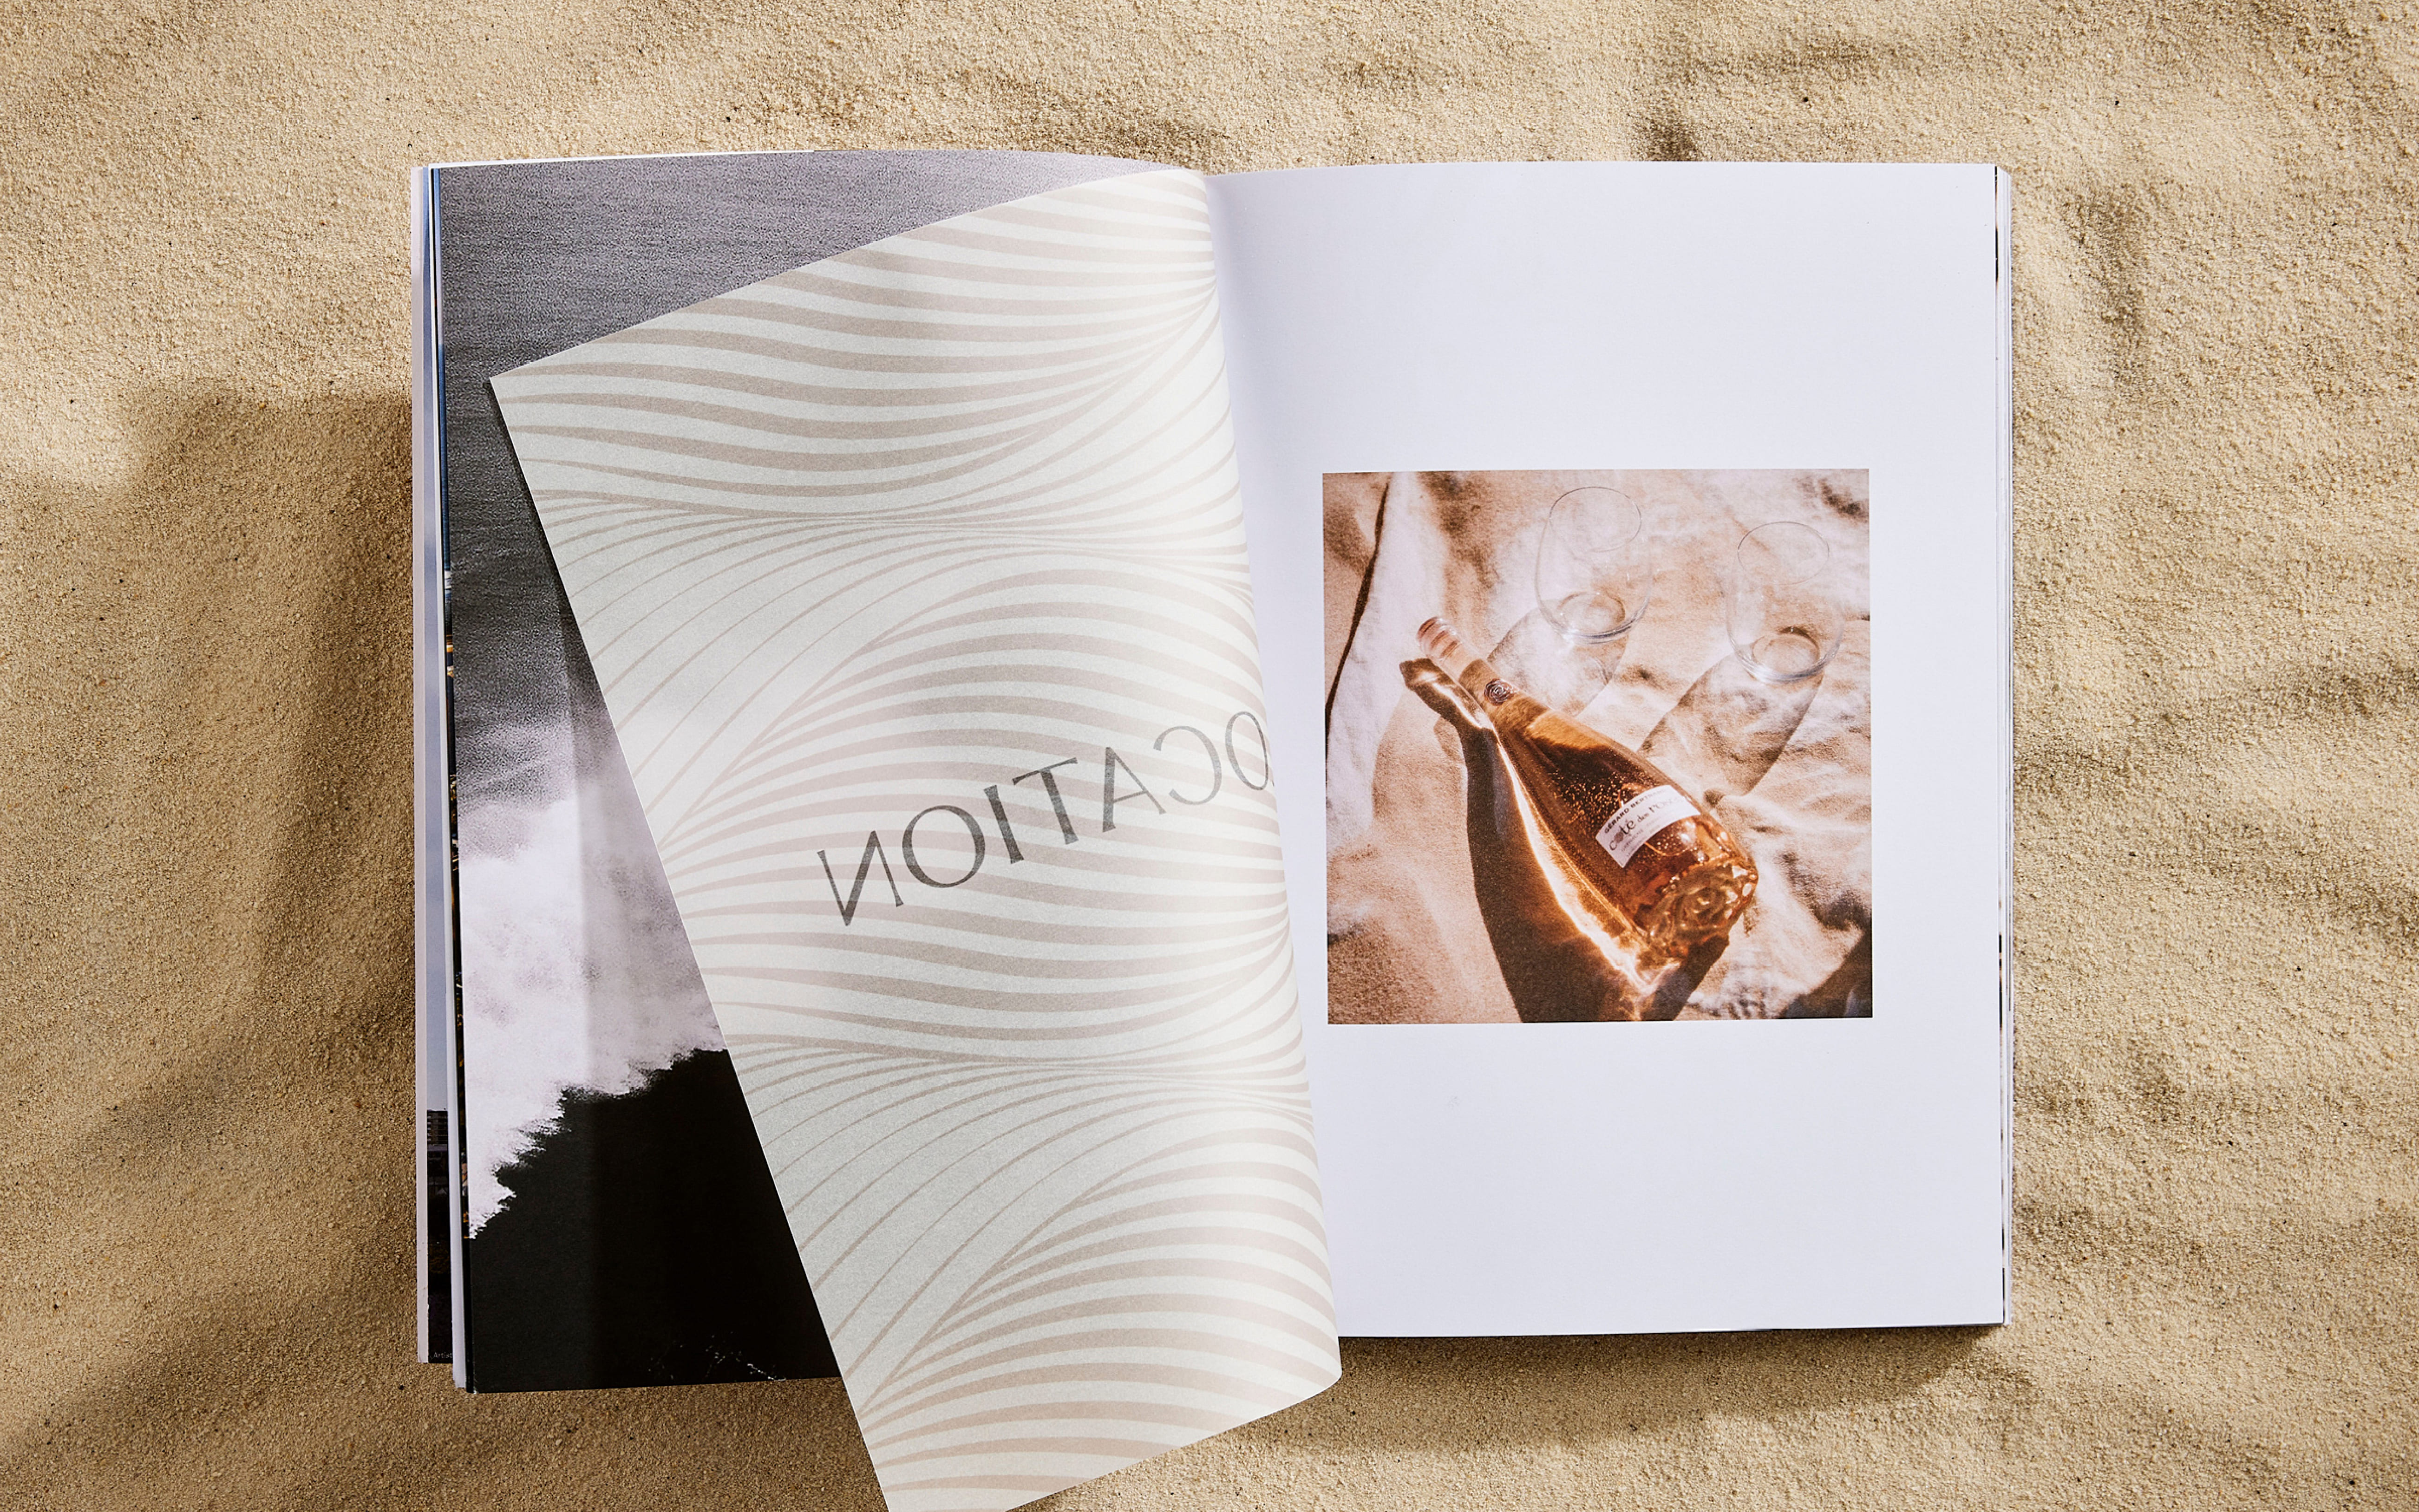 Nina brochure spread showing image of champagne and glasses on beach